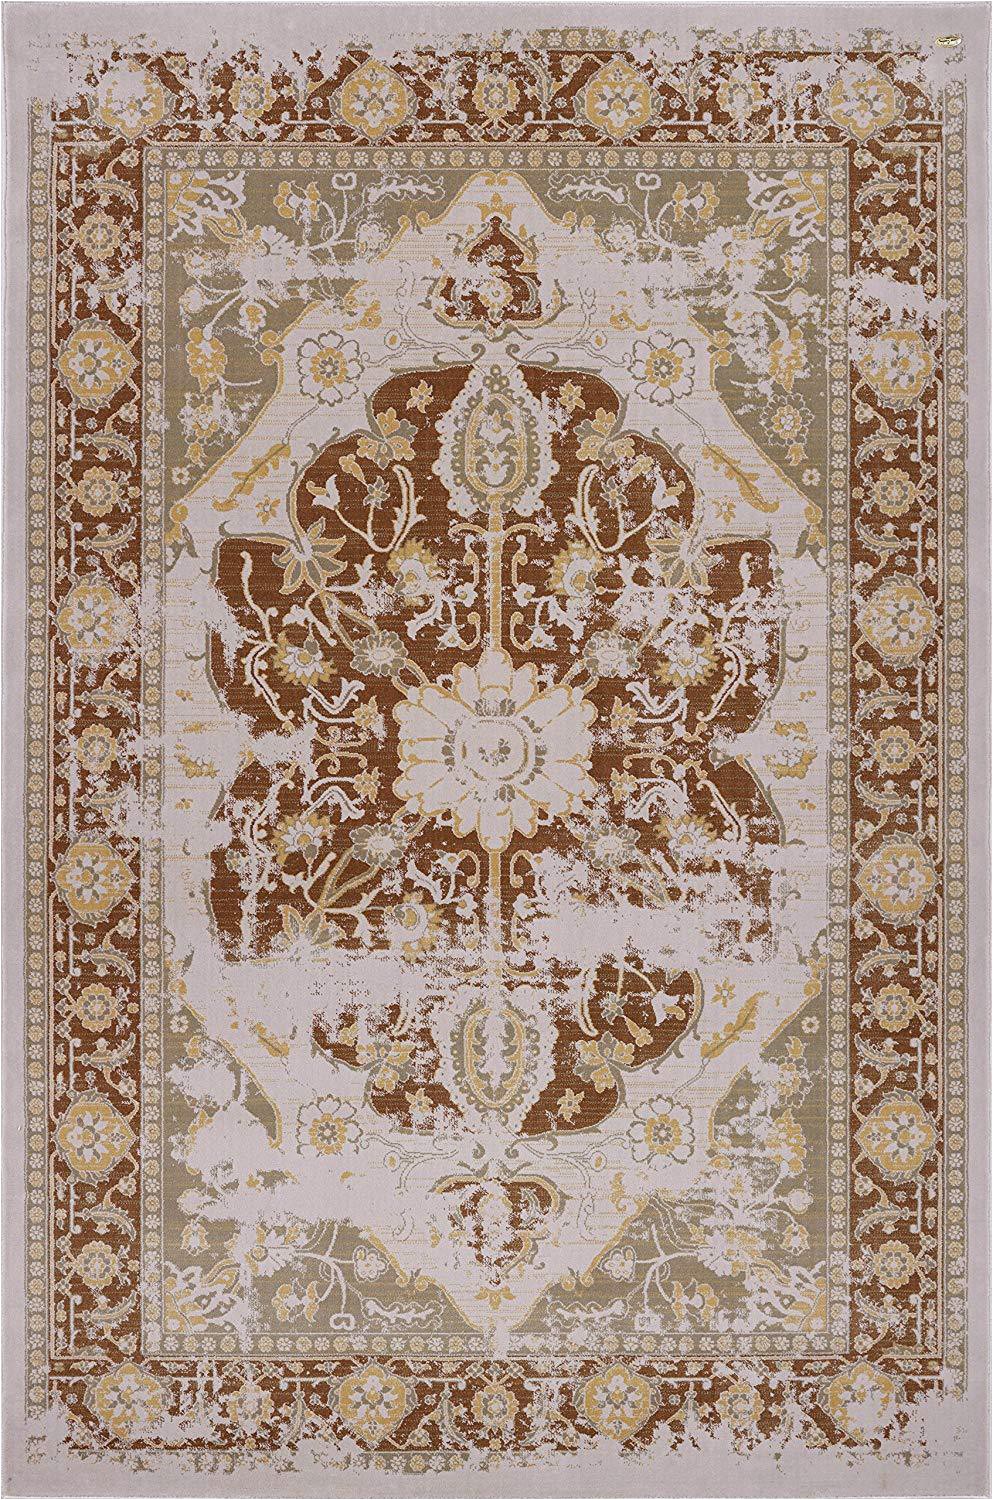 Clearance area Rugs Near Me Products – Pierre Cardin Rugs